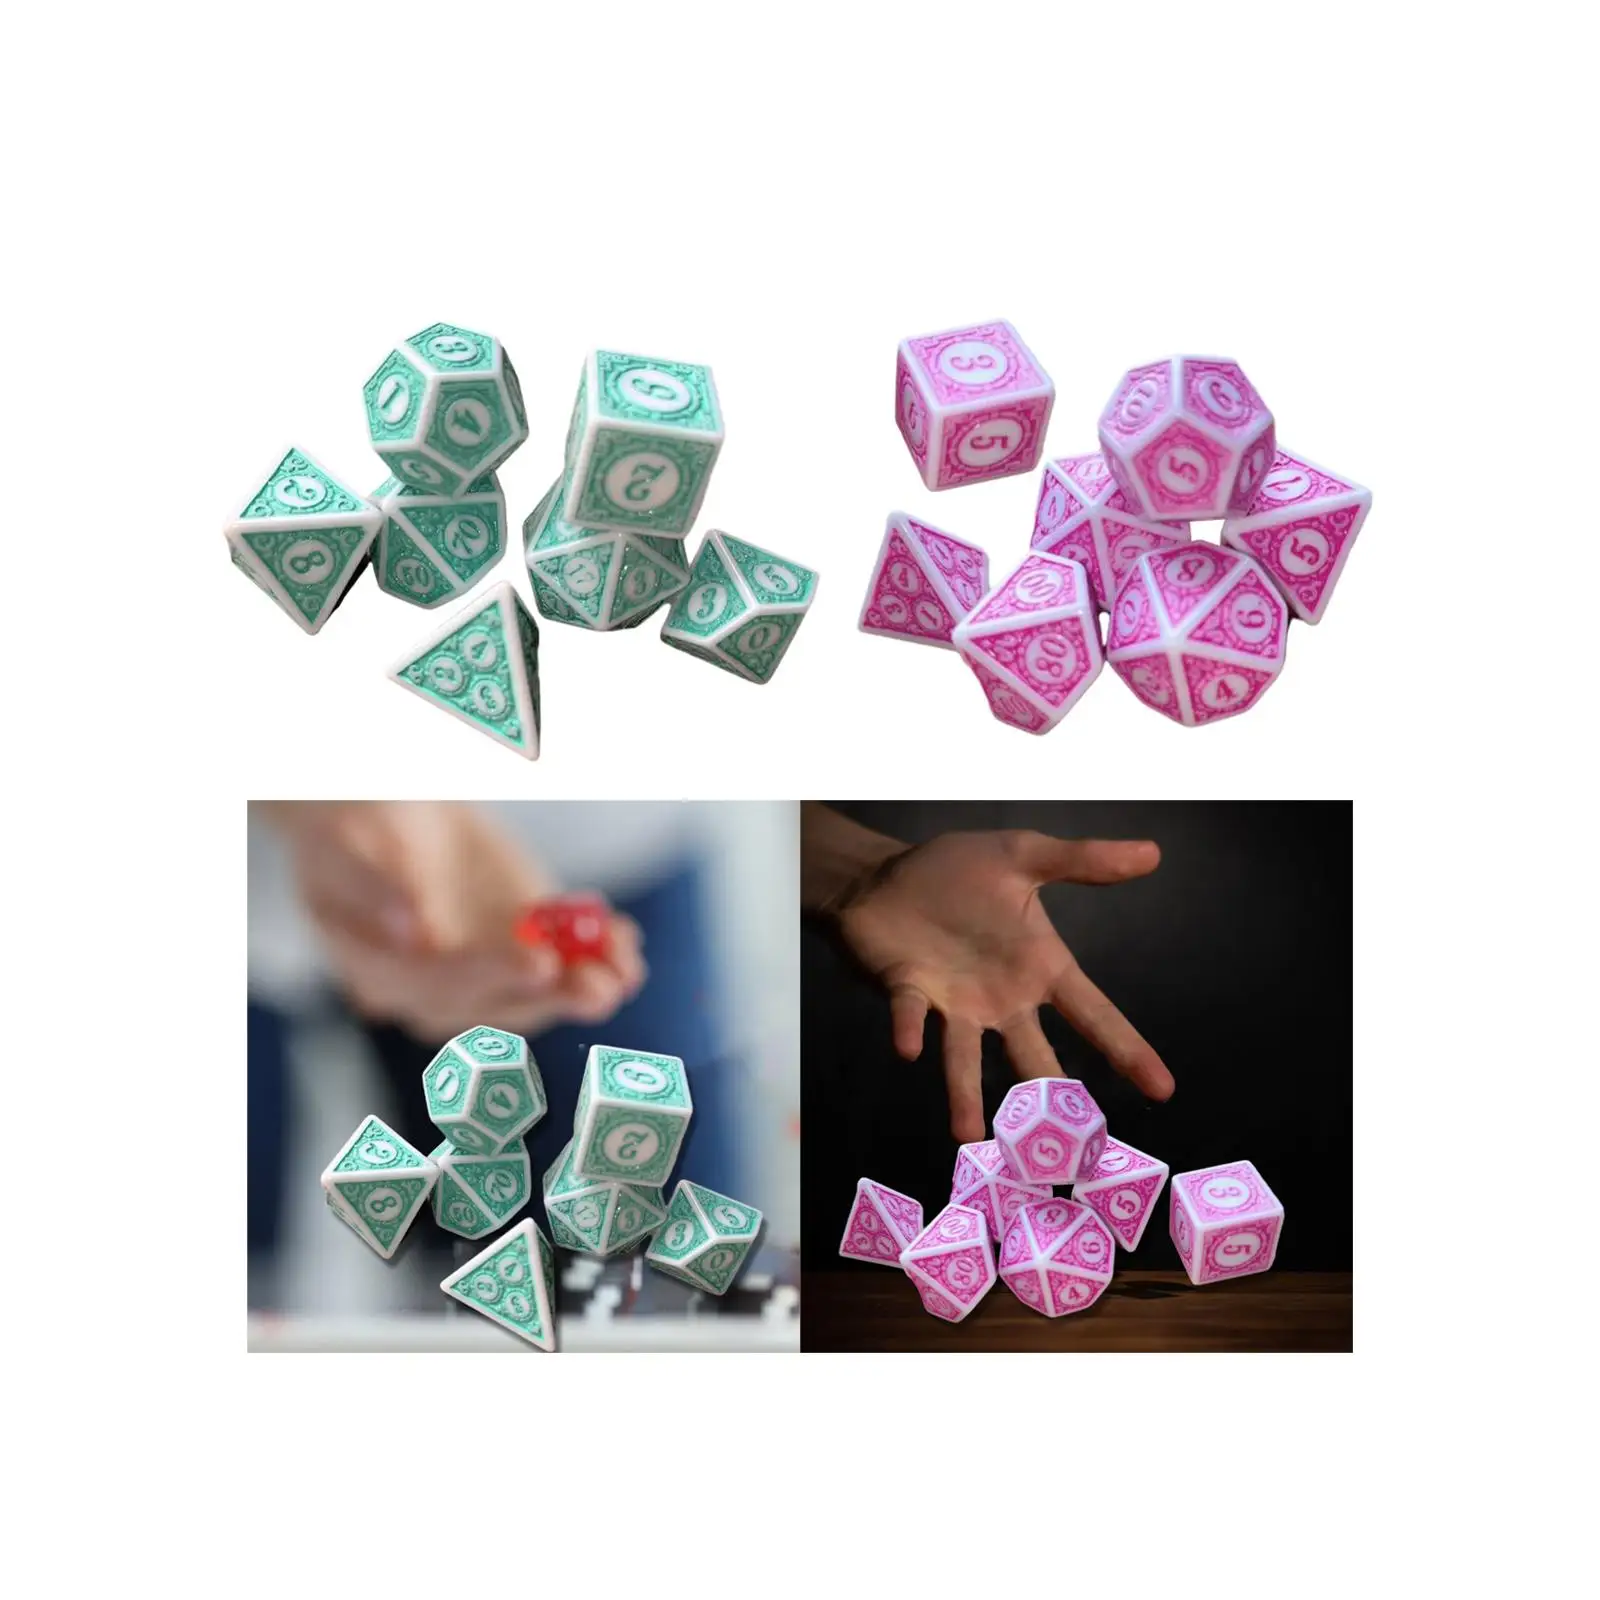 7x Game Dices Set Party Game Dices Party Favors Math Counting Teaching Aids Dice Set for KTV Bar Party Card Games Card Game